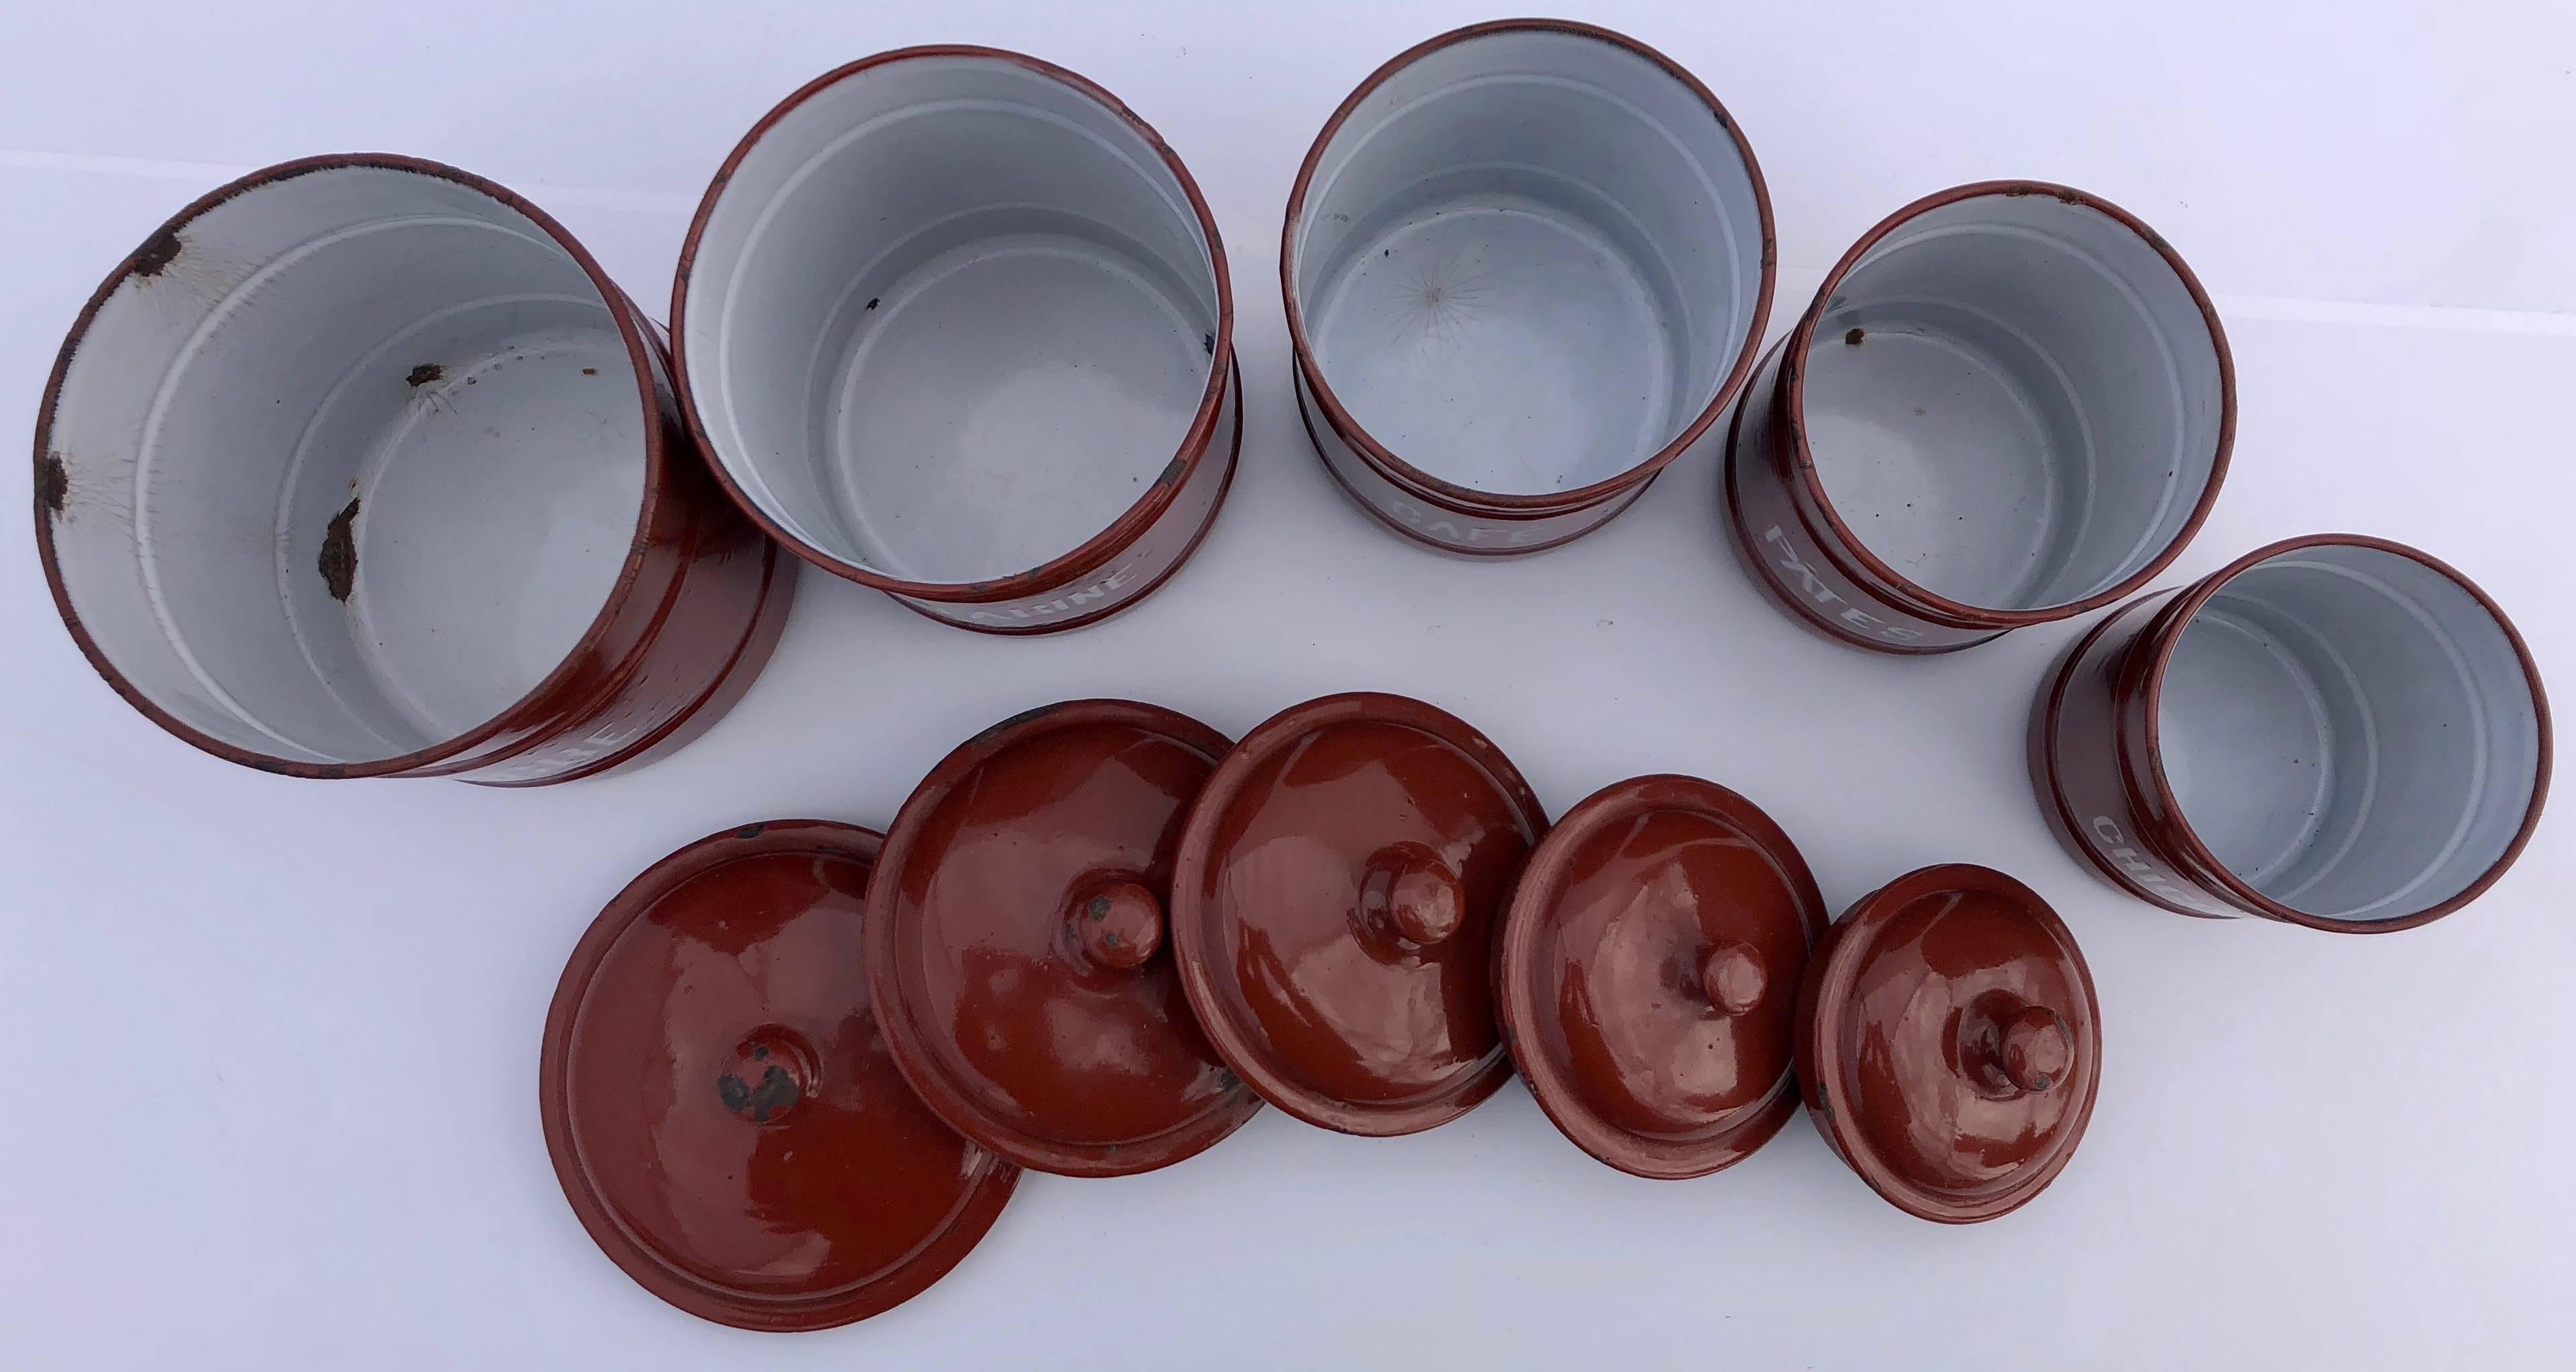 Enameled French Enamelware Cannister Set of Five with Lids in Brown Color, Mid-1900s For Sale